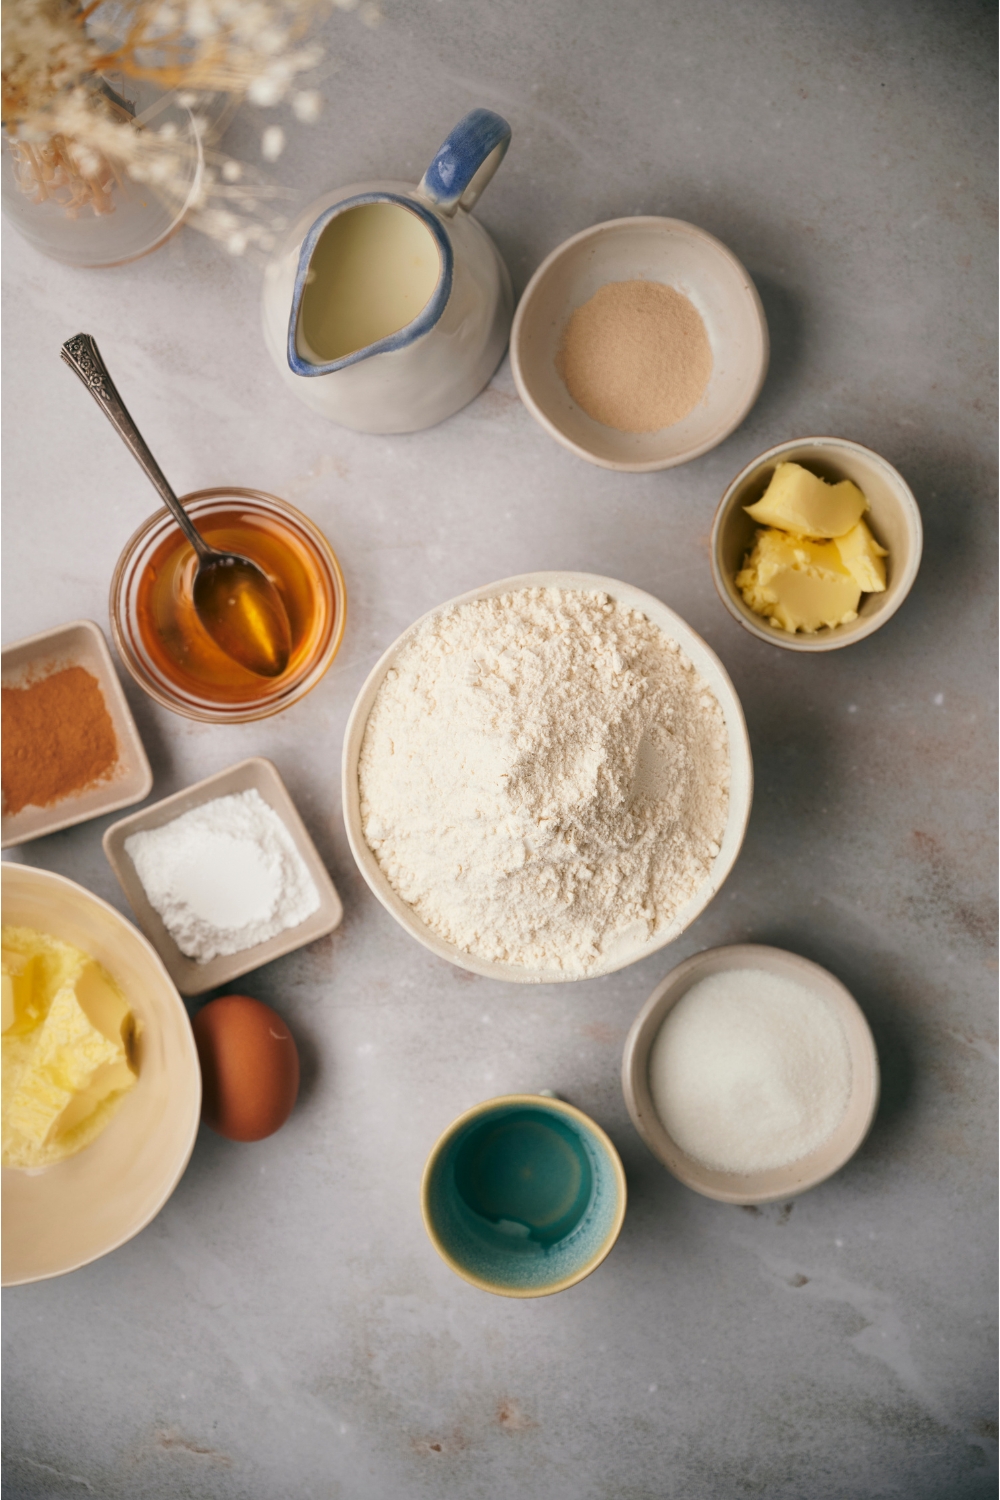 An assortment of ingredients including bowls of flour, butter, sugar, yeast, honey, powdered sugar, an egg and a container of milk.